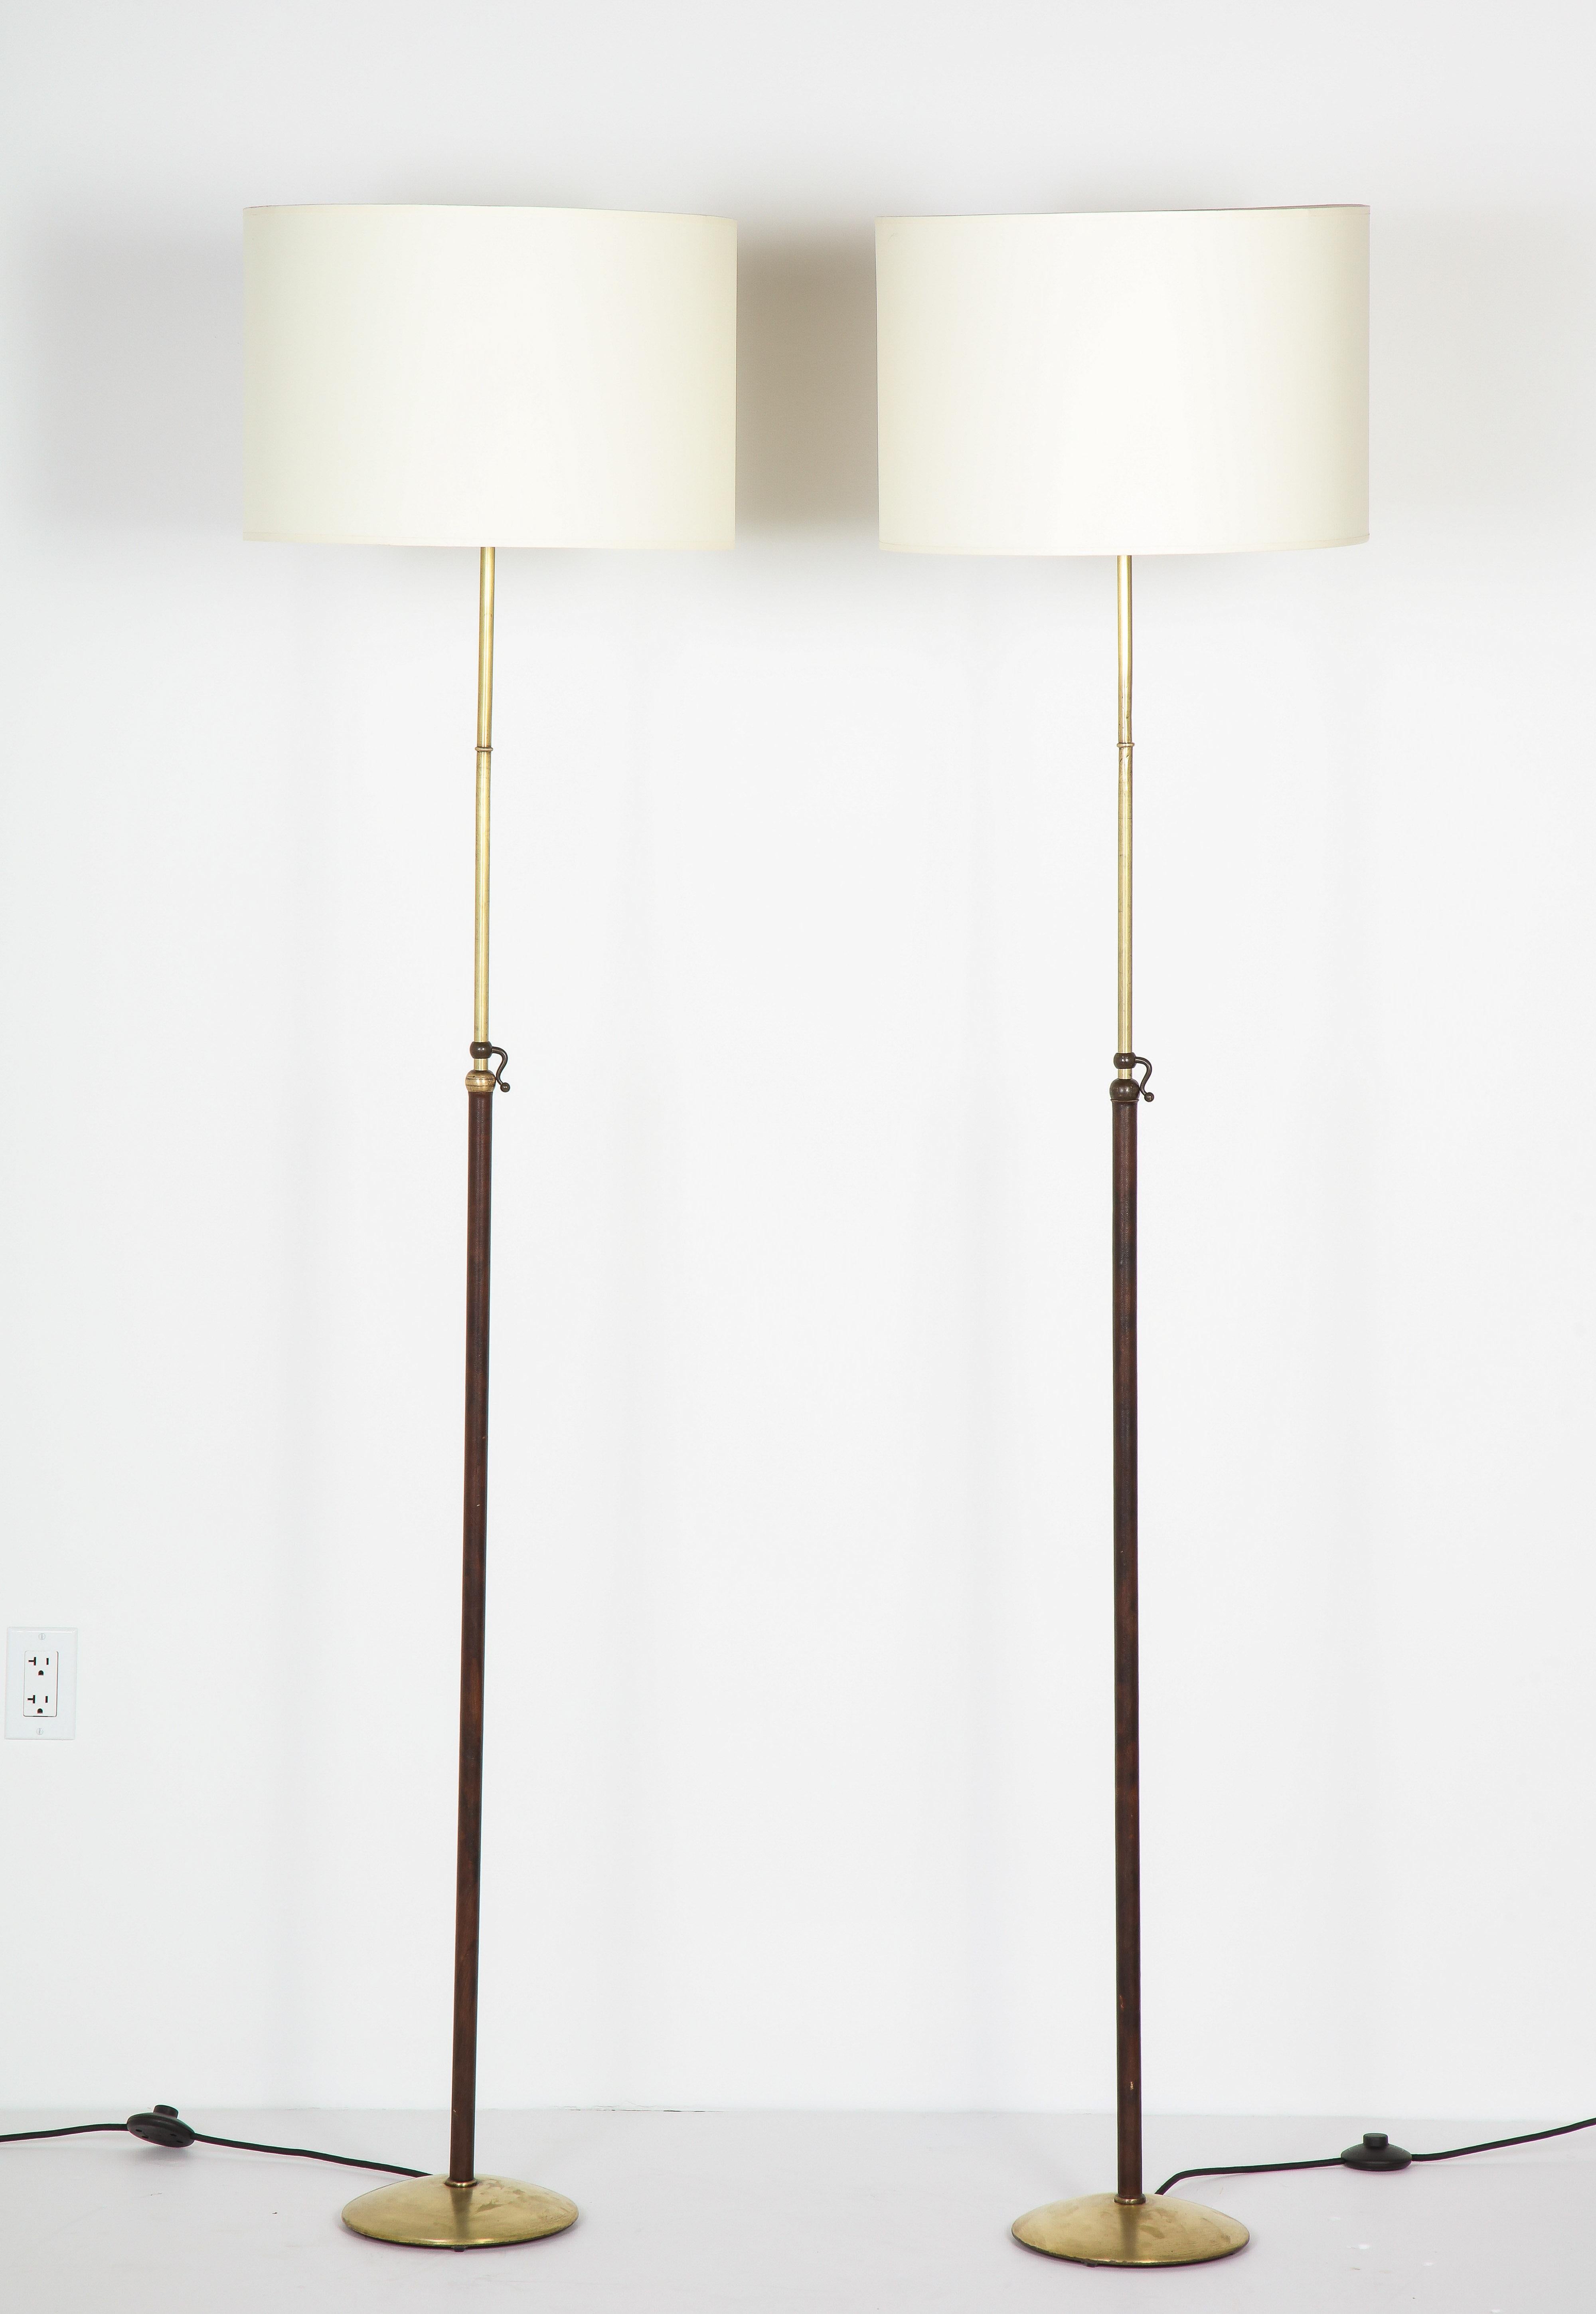 Pair of leather and brass adjustable floor lamps by Jacques Adnet, leather is original, brass has been lightly restored. Rewired. Base is 10'' in diameter, extends to 75''.